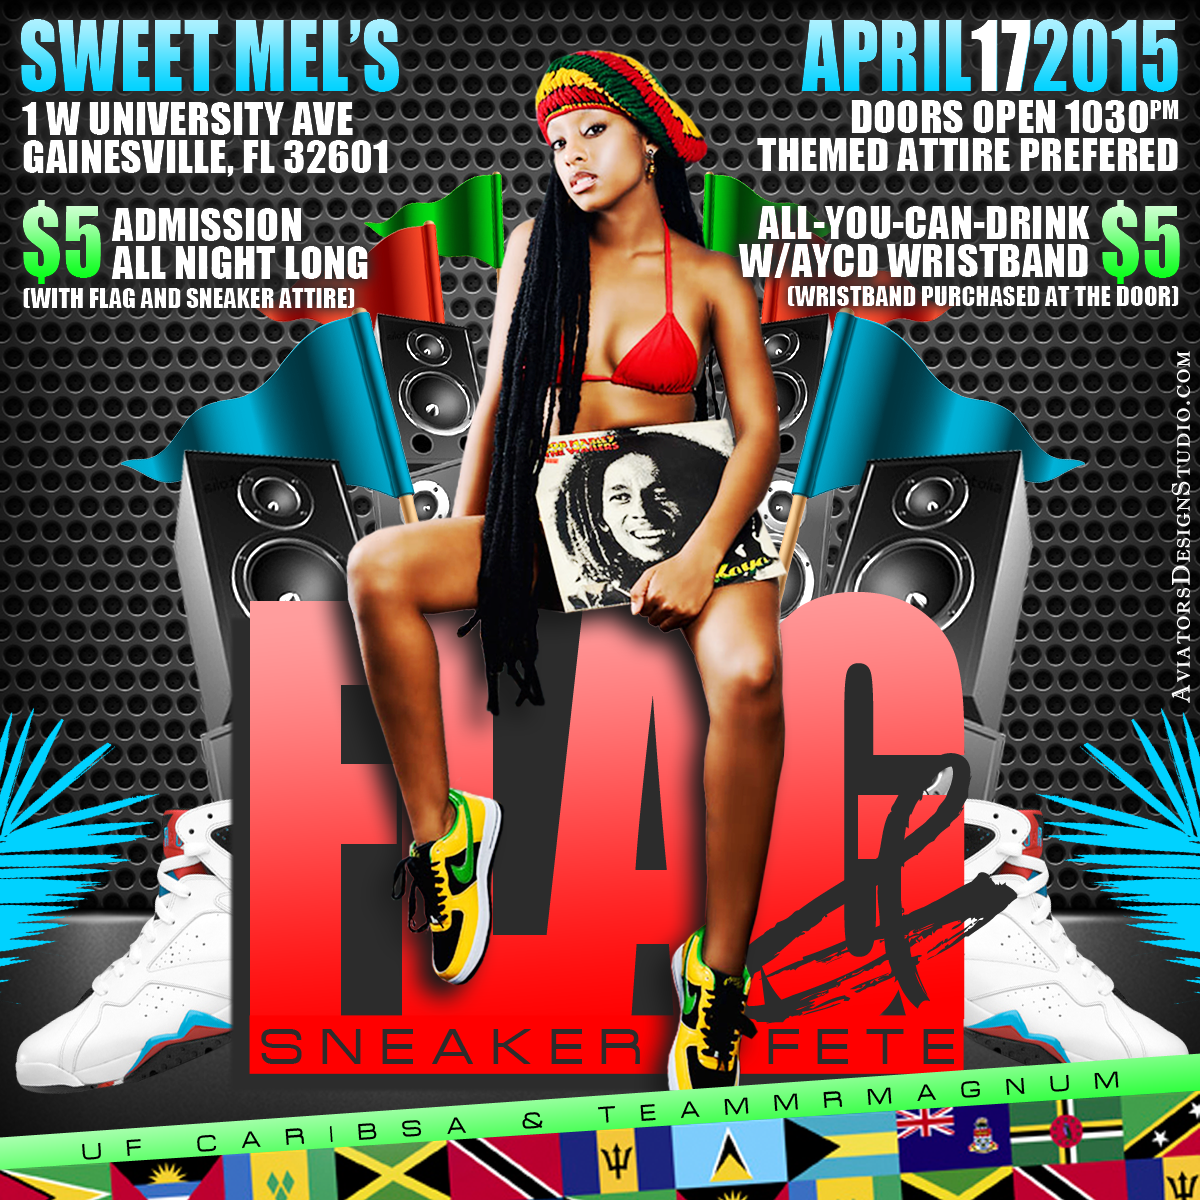 UF CaribSA presents Flag & Sneaker Fete with Mr. Magnum